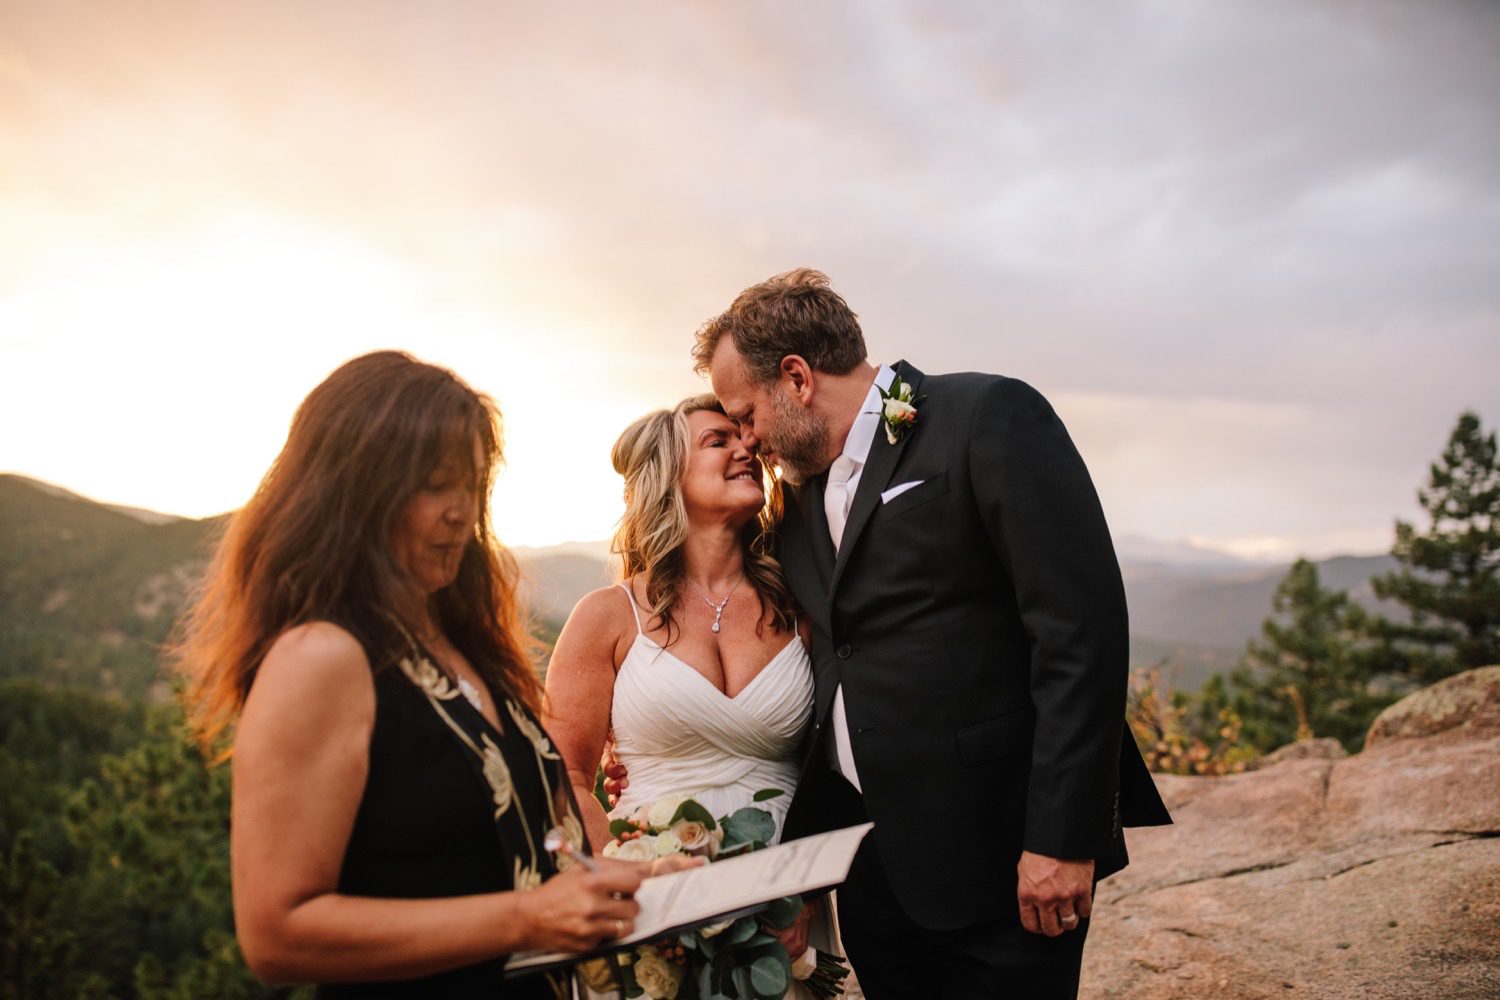 Bride groom and officiant signing marriage license for Colorado mountain elopement